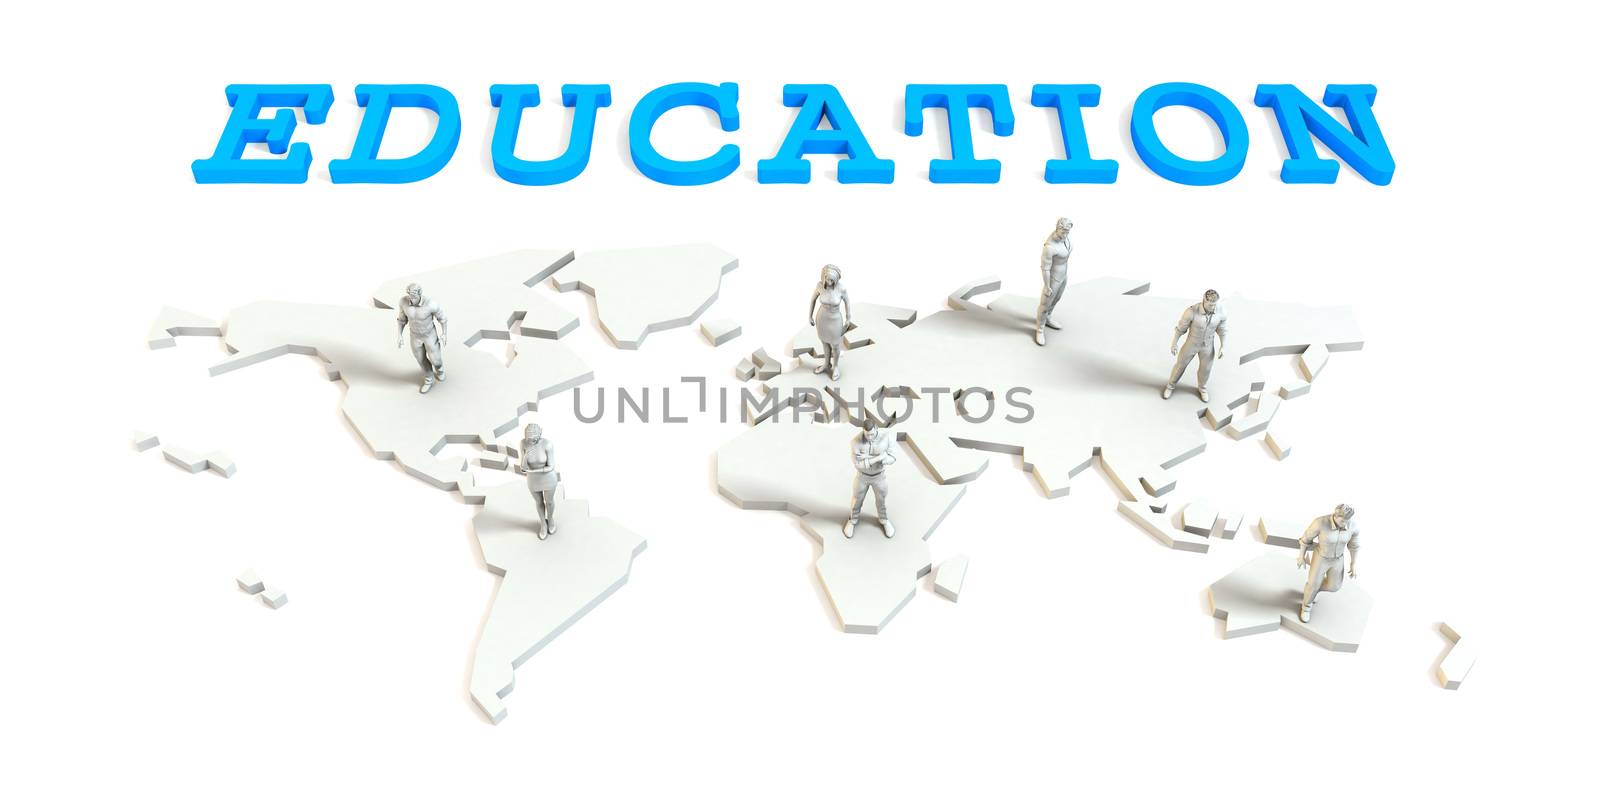 Education Global Business by kentoh